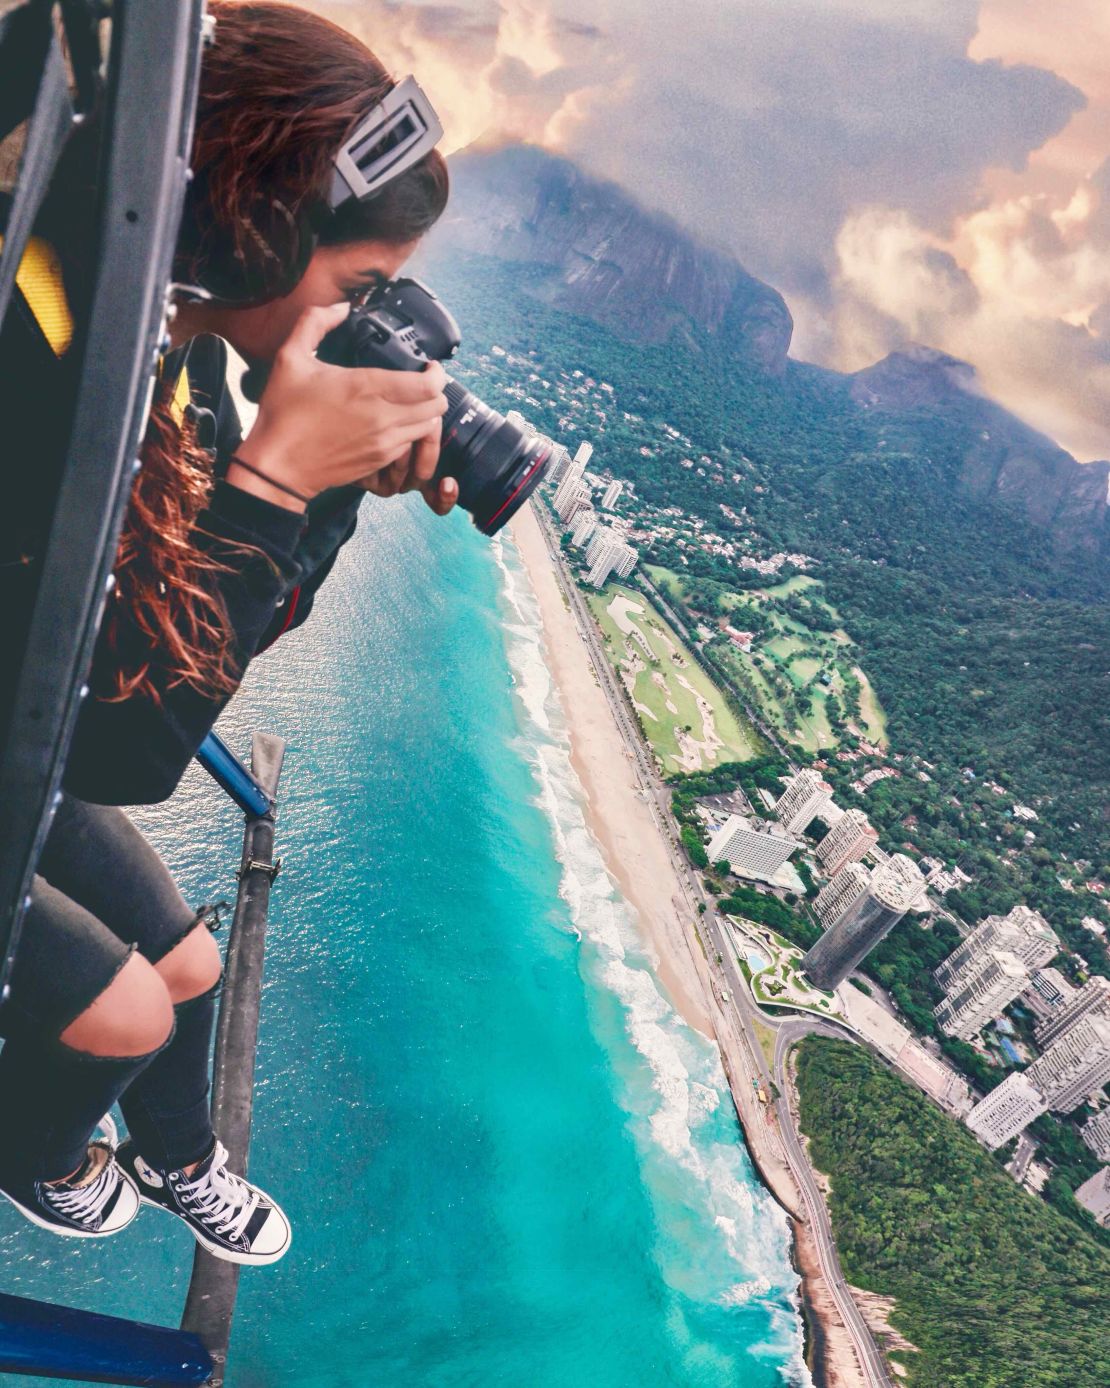 Jolie, photographing Rio de Janeiro from a helicopter.